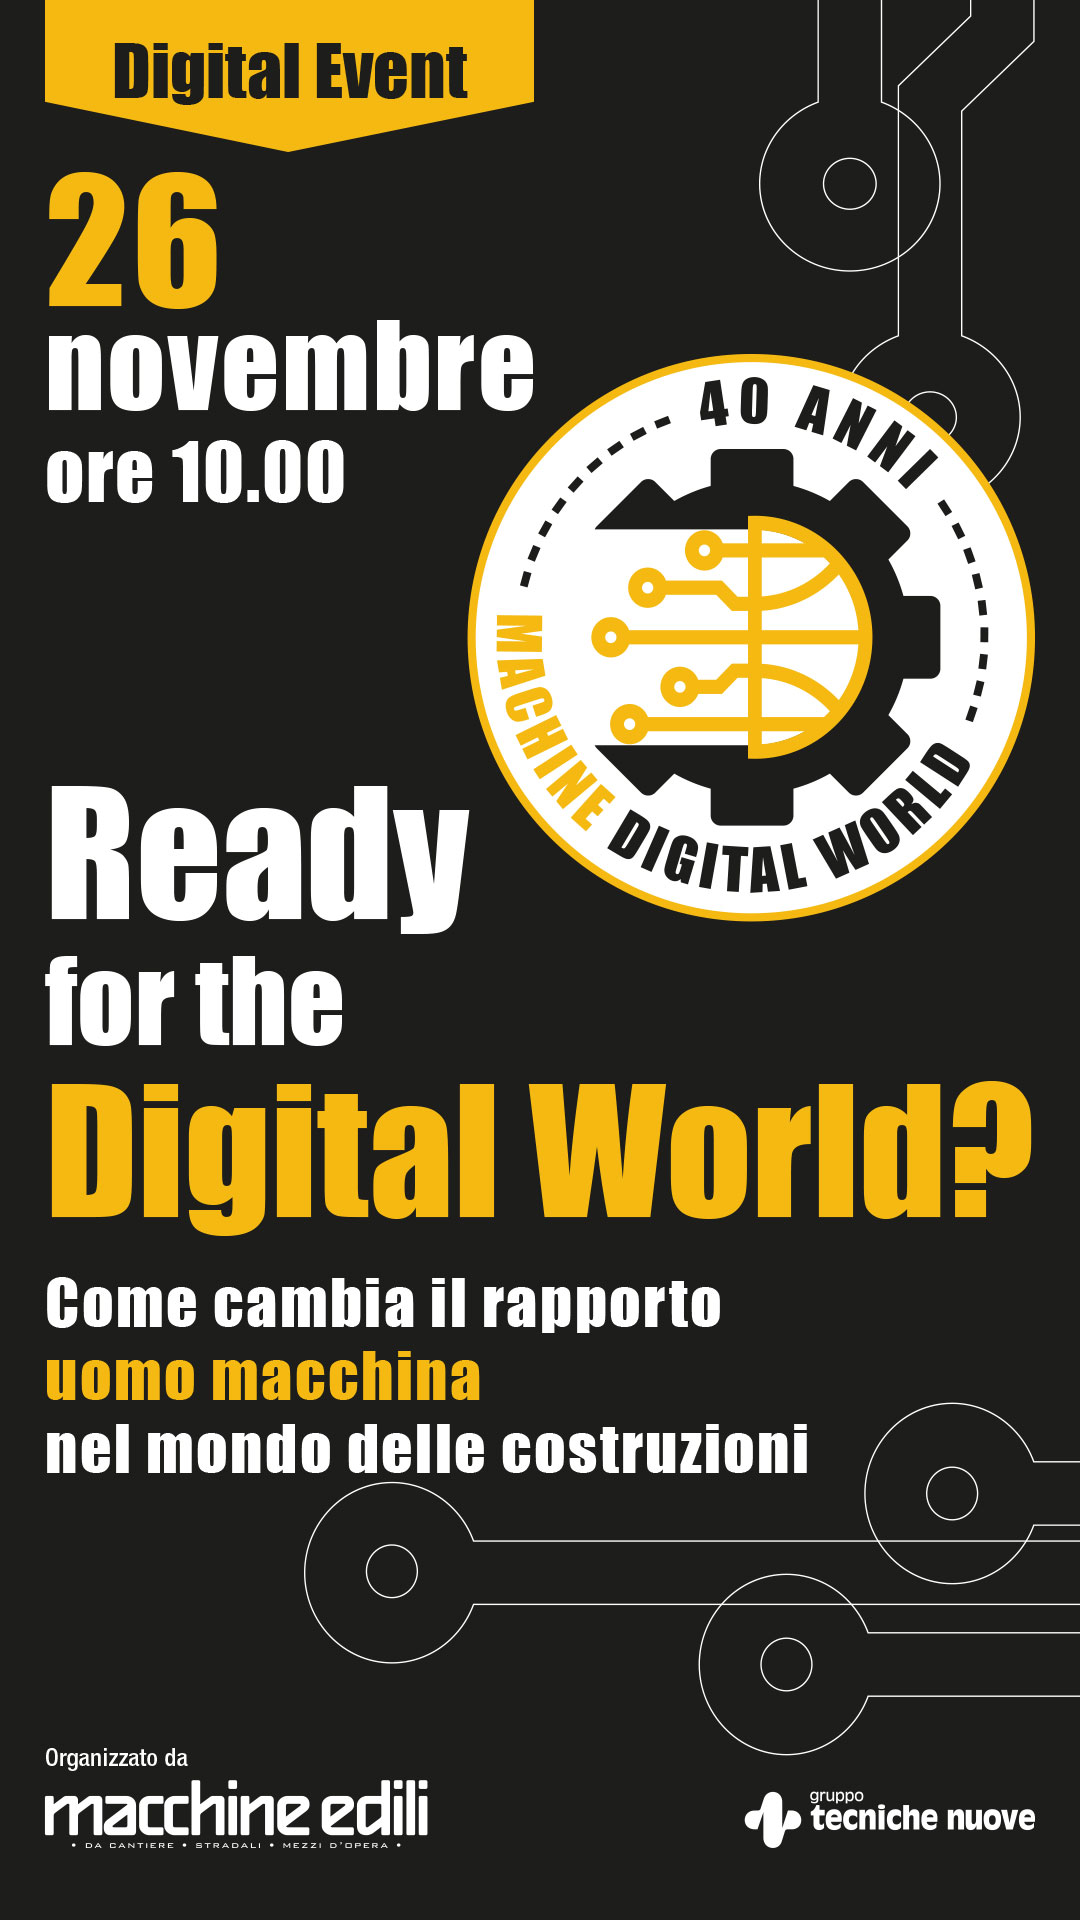 Ready for the digital world?